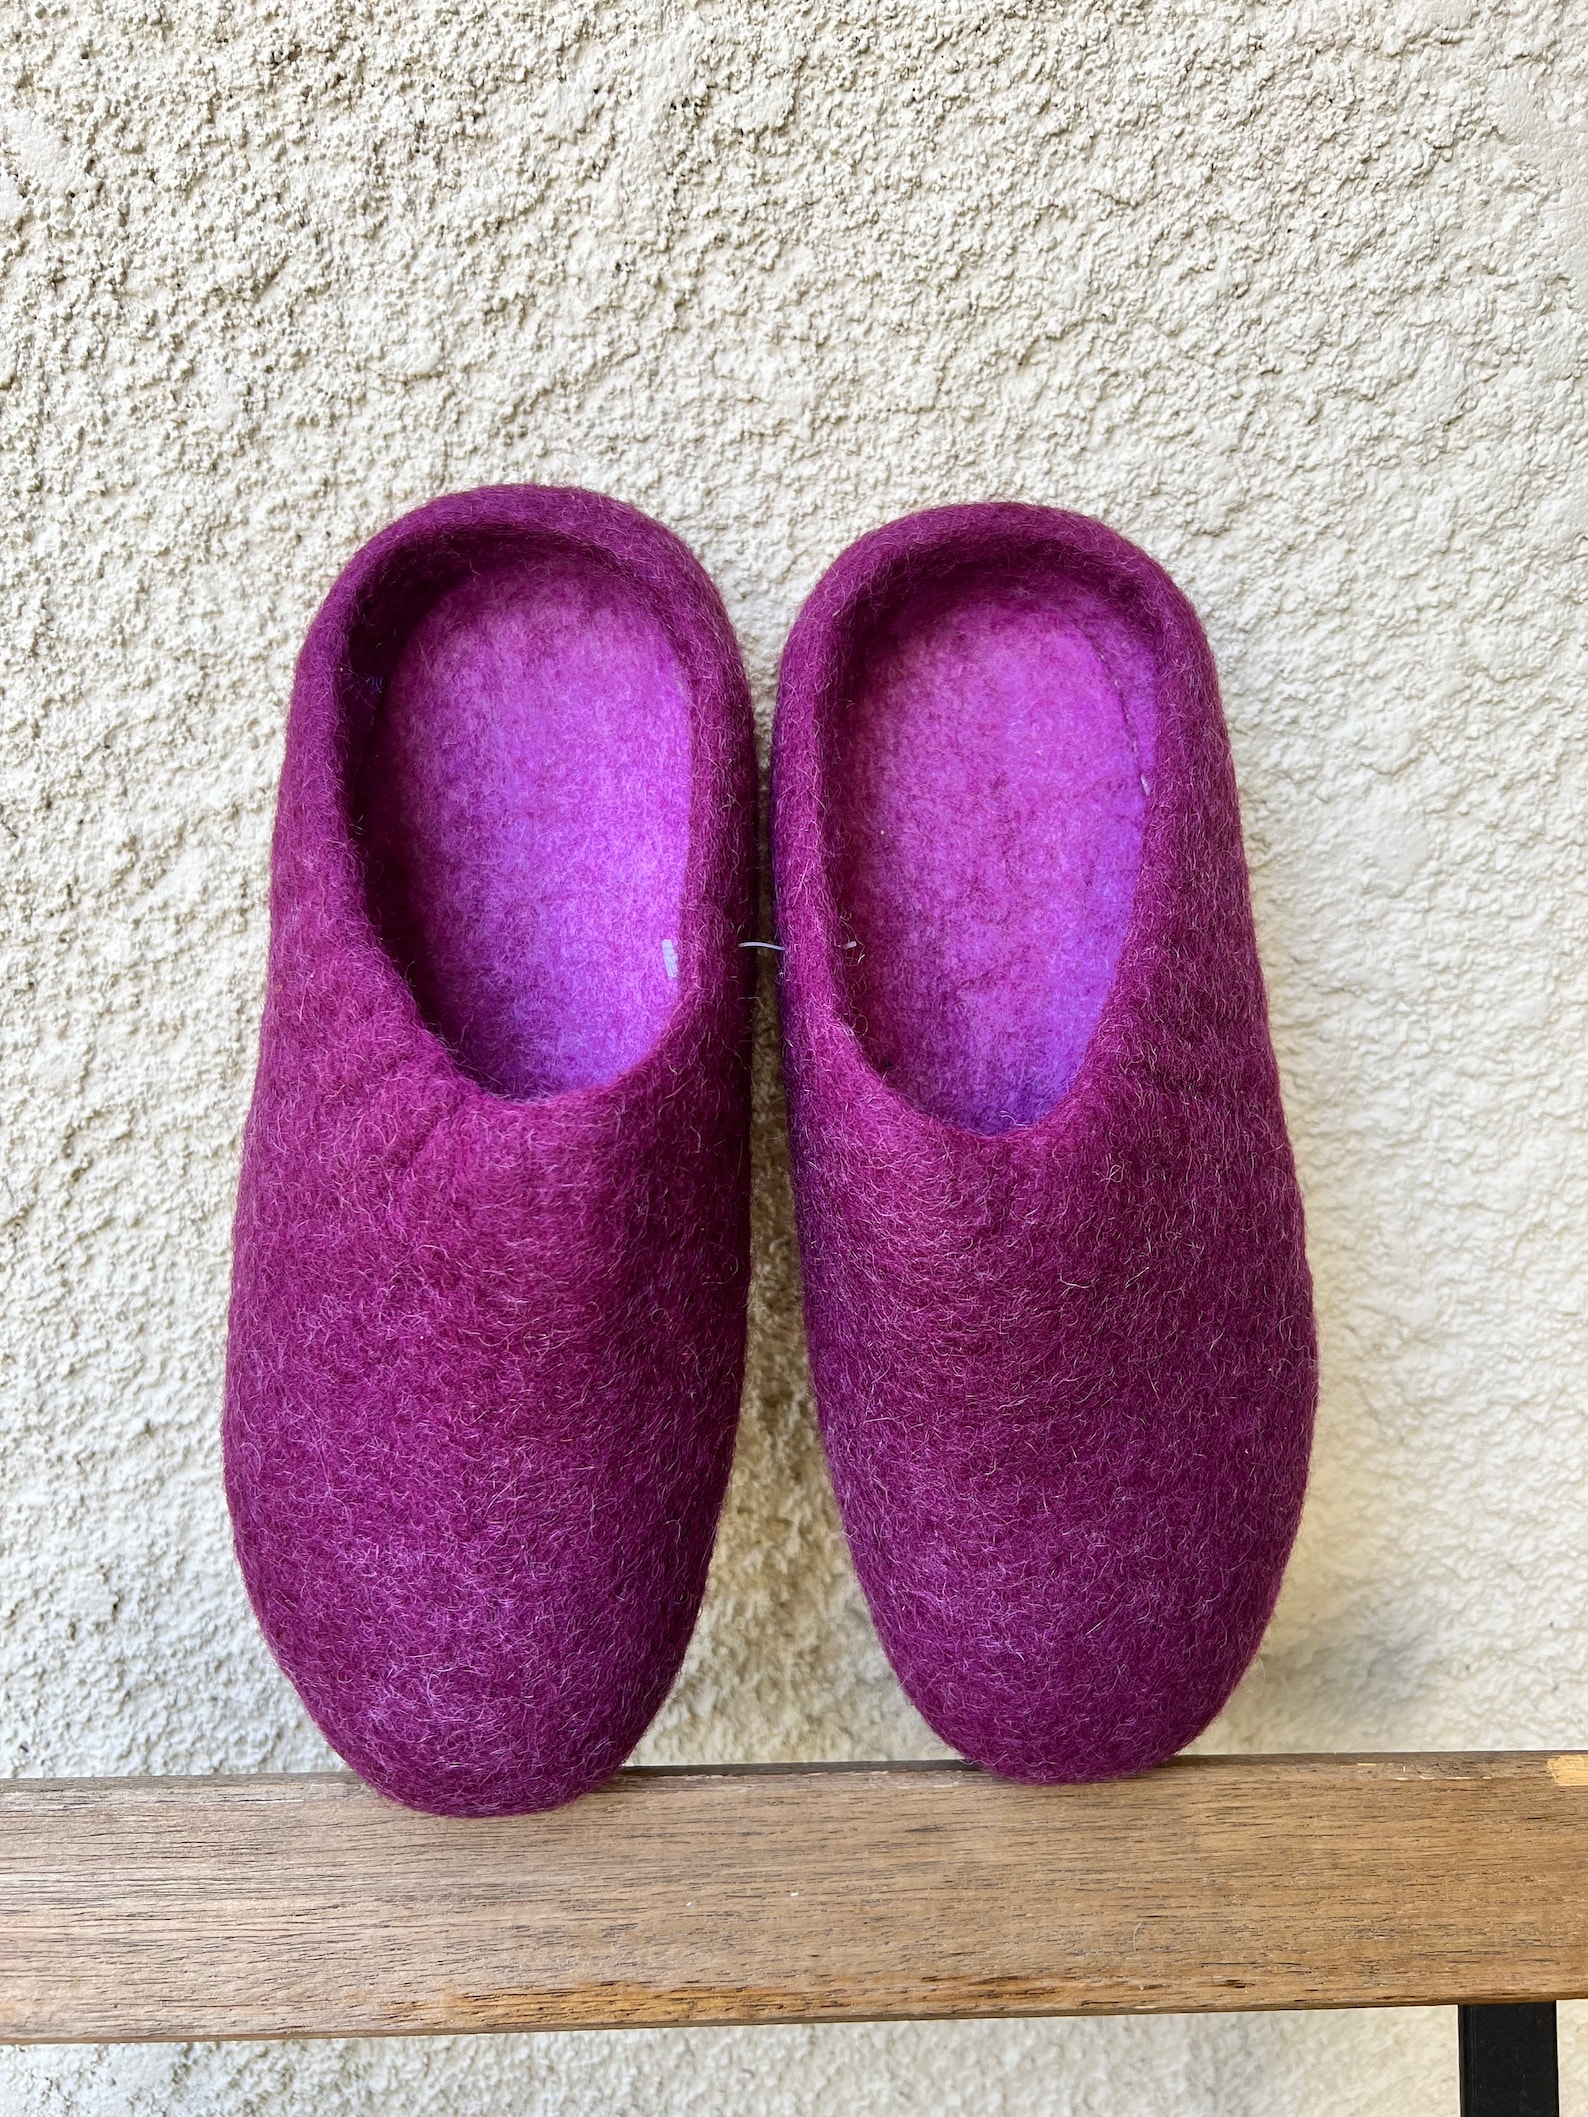 Felted Wool Slippers Felted Shoes Handmade Felt Indoor - Etsy